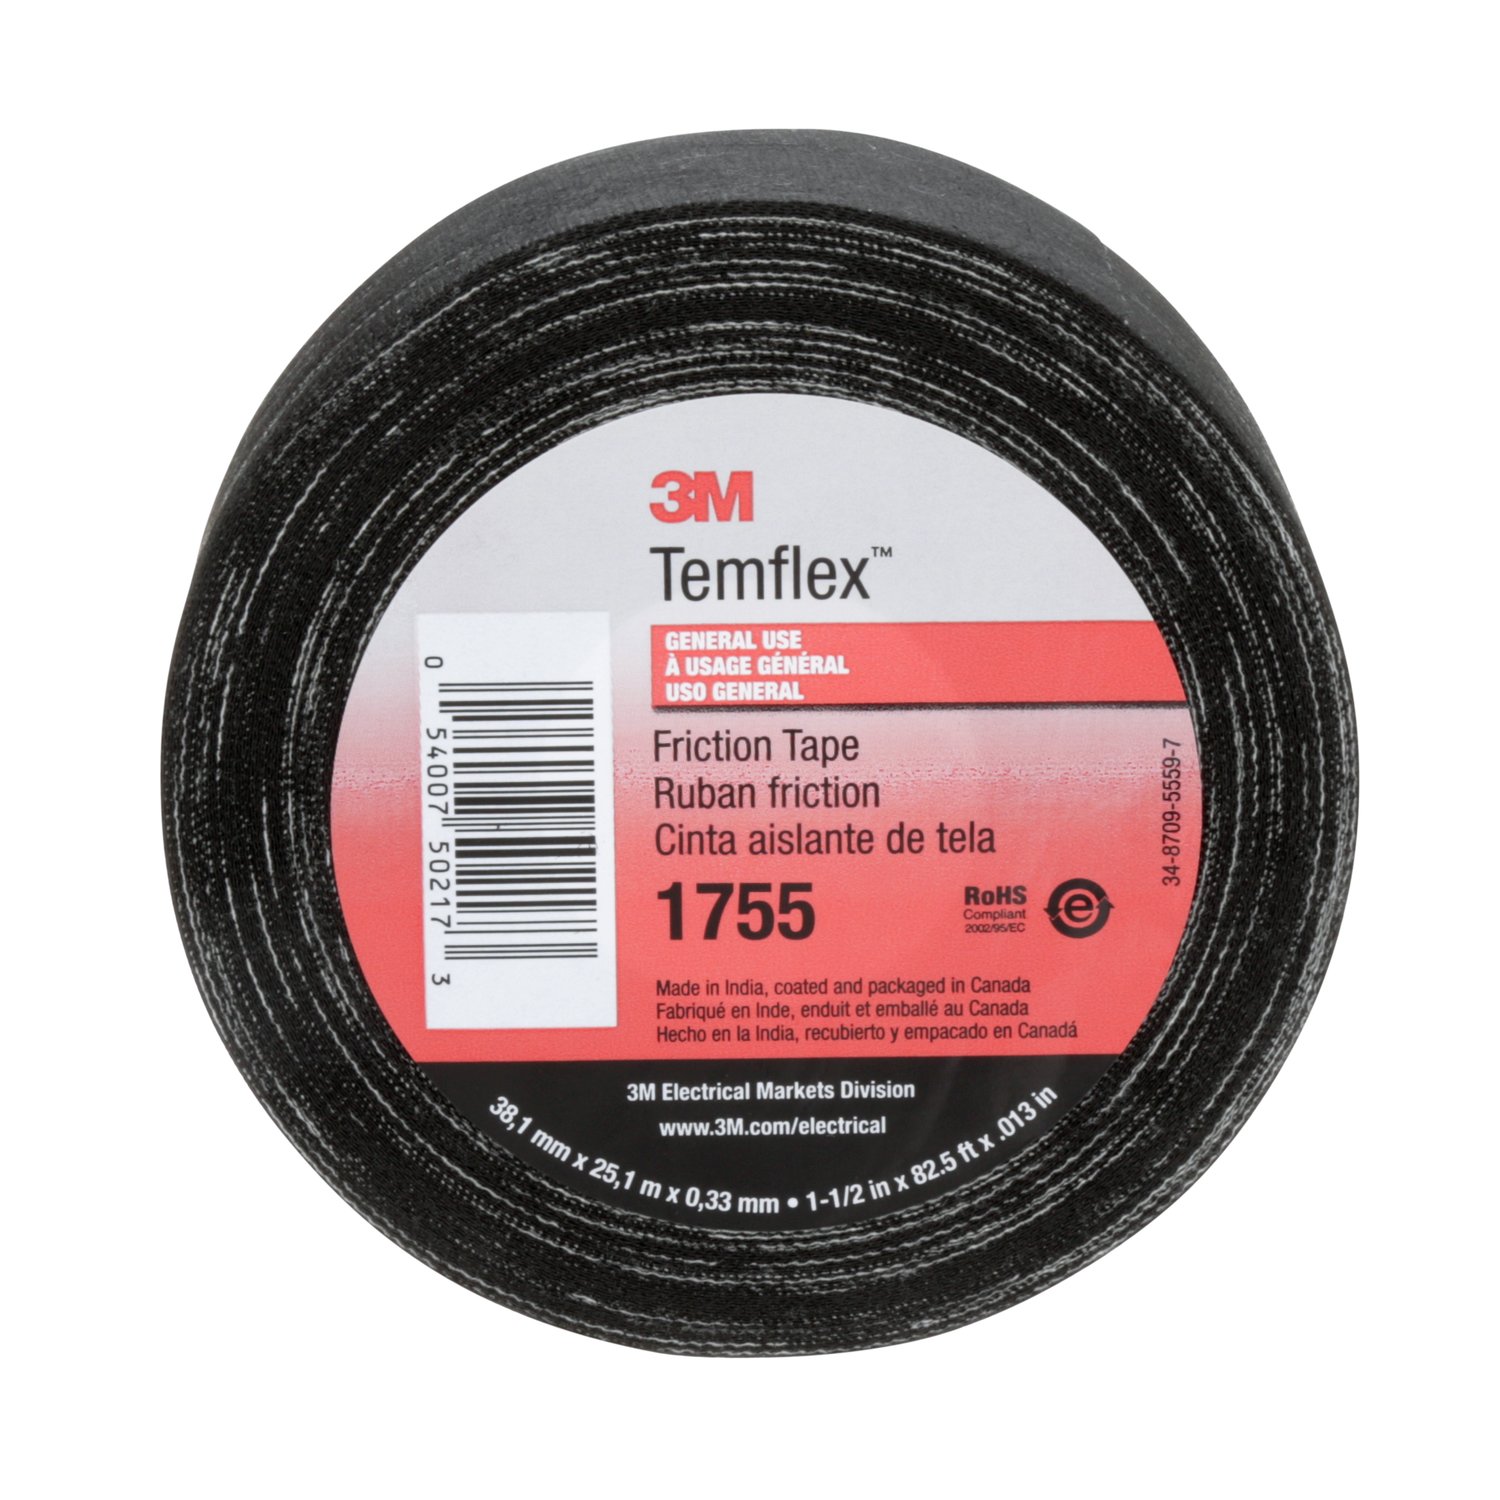 00054007502173  3M Temflex Cotton Friction Tape 1755, 1-1/2 in x